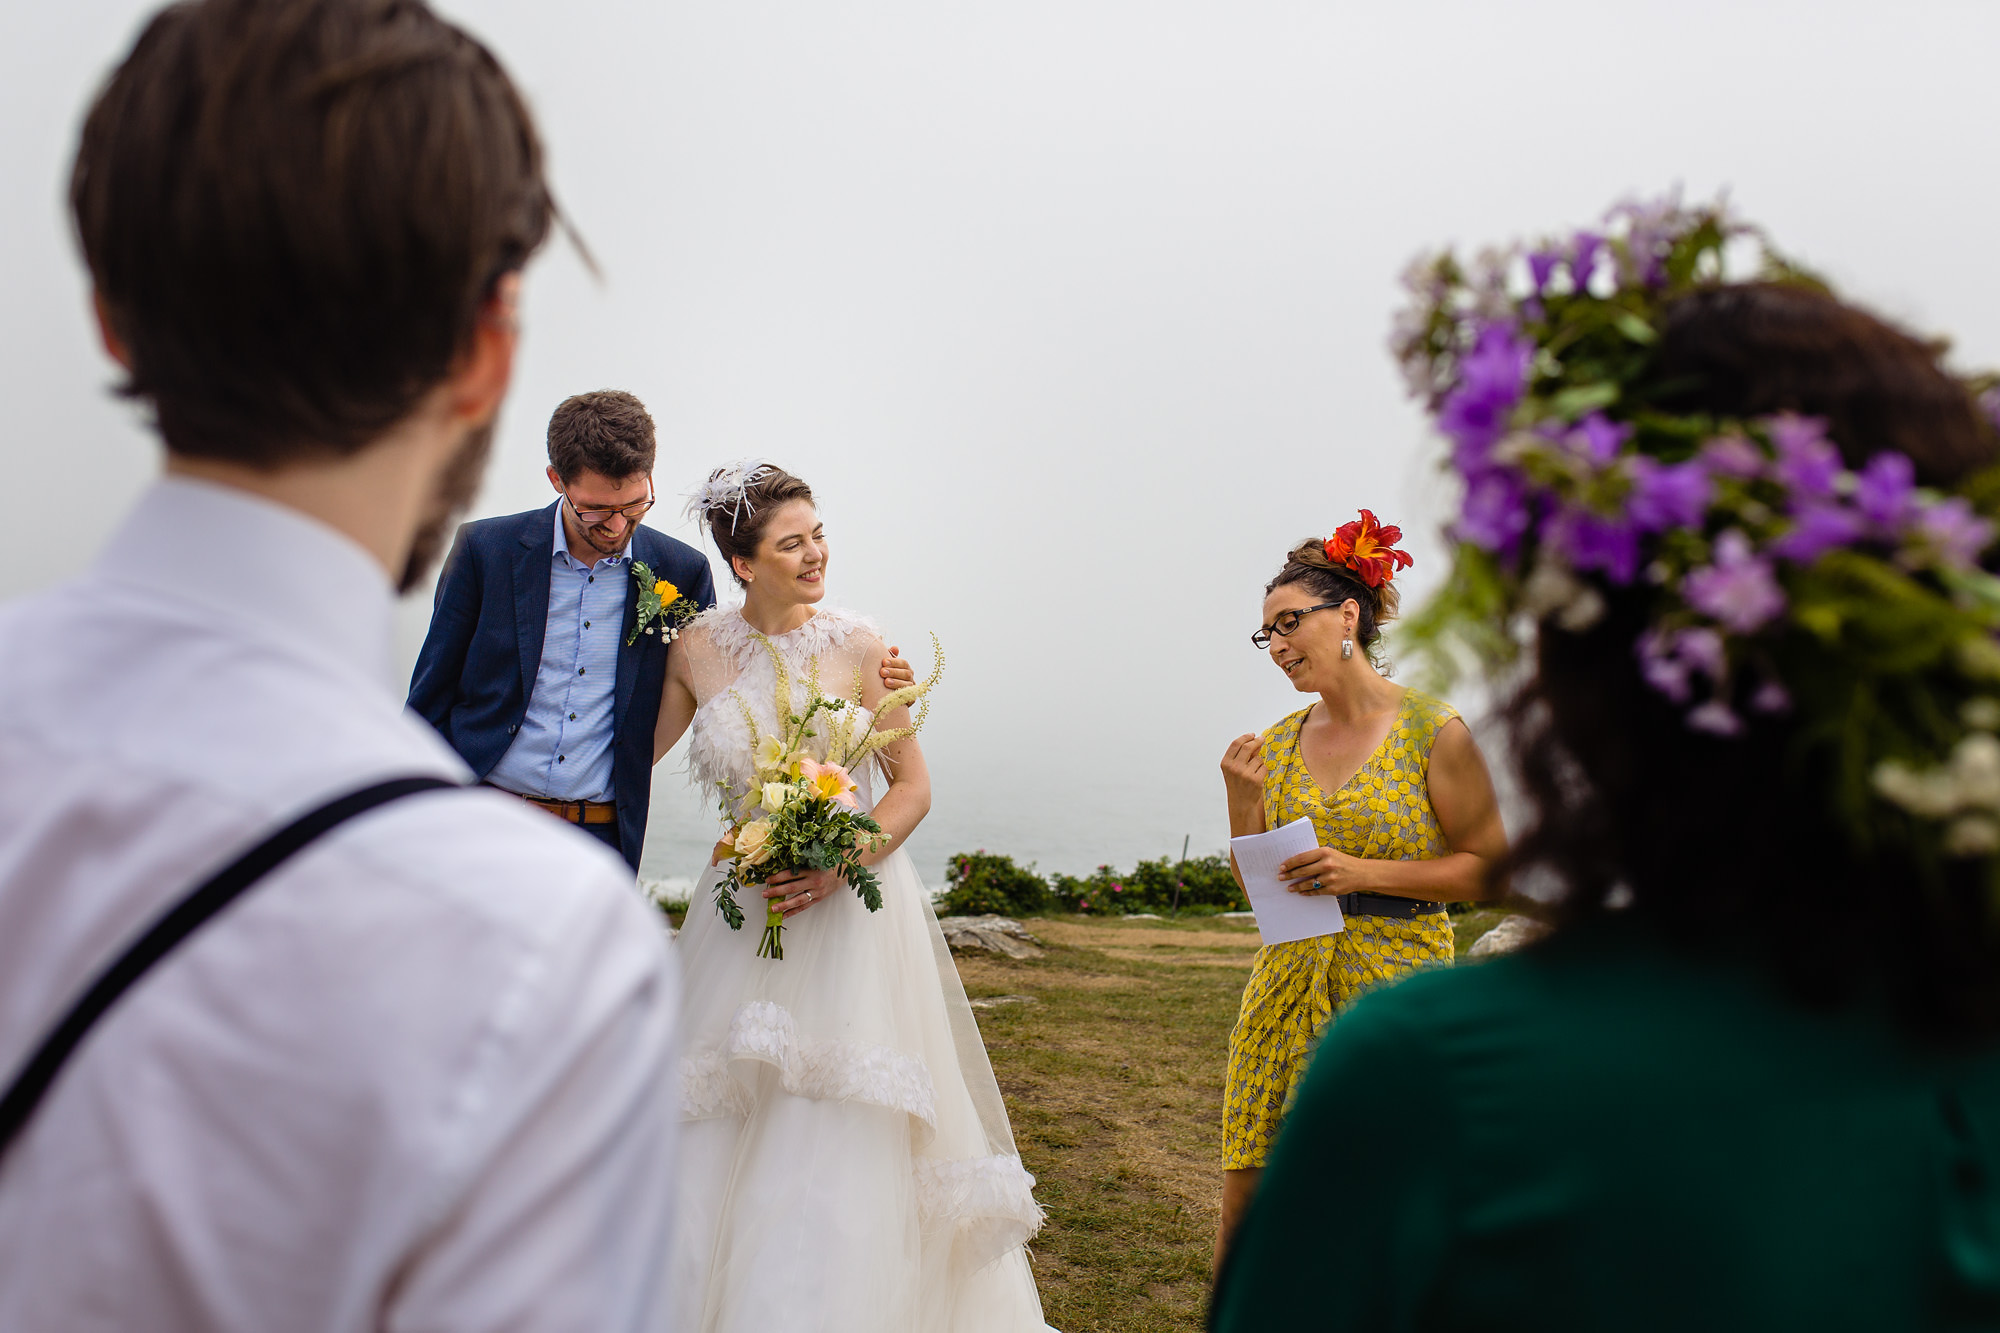 A small wedding ceremony at Pemaquid Point Lighthouse in Maine